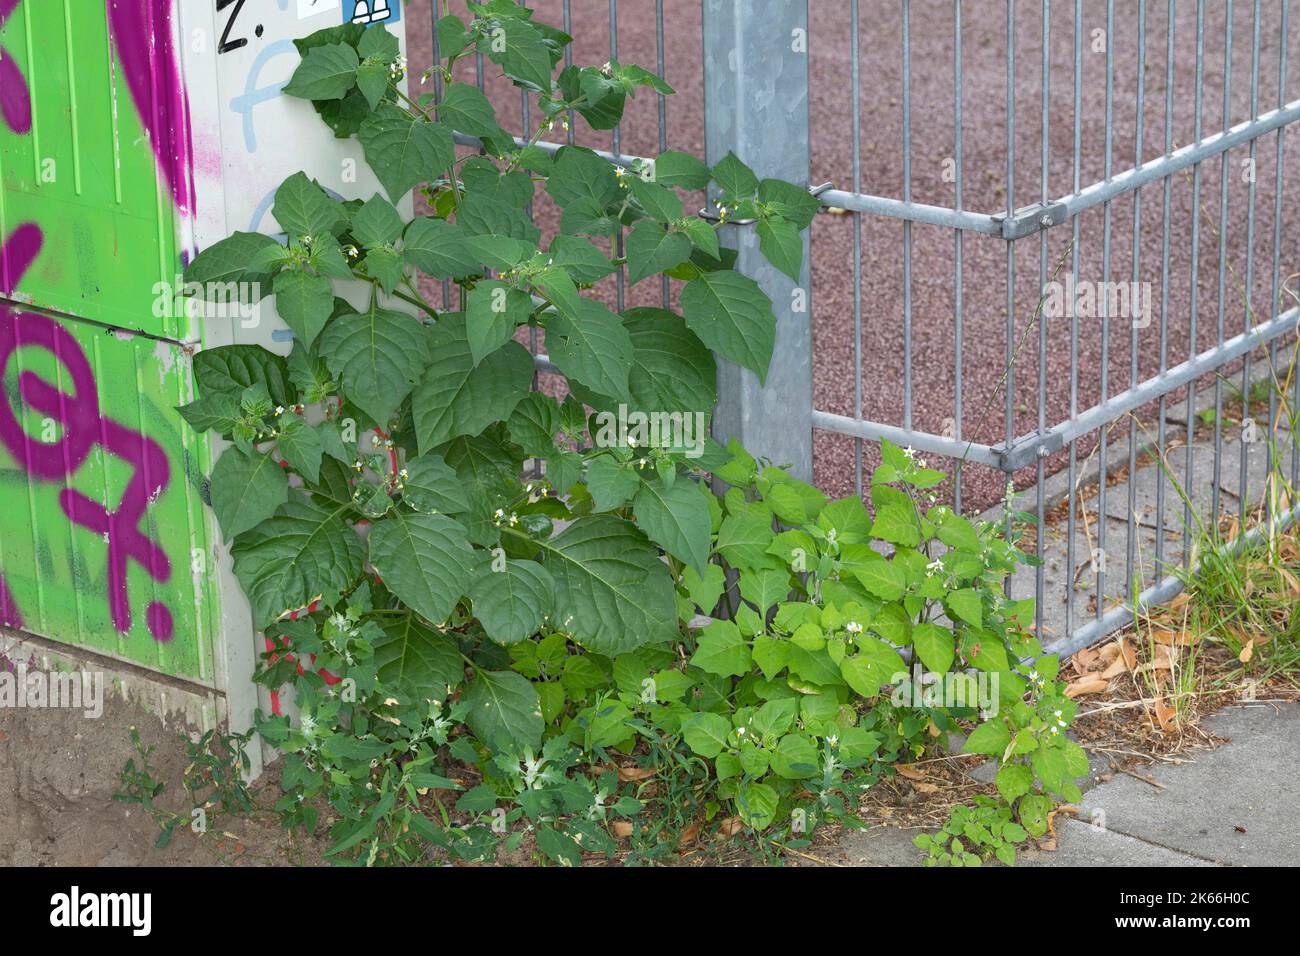 Common nightshade, Black nightshade (Solanum nigrum), growing in pavement gaps at a fence, Germany Stock Photo